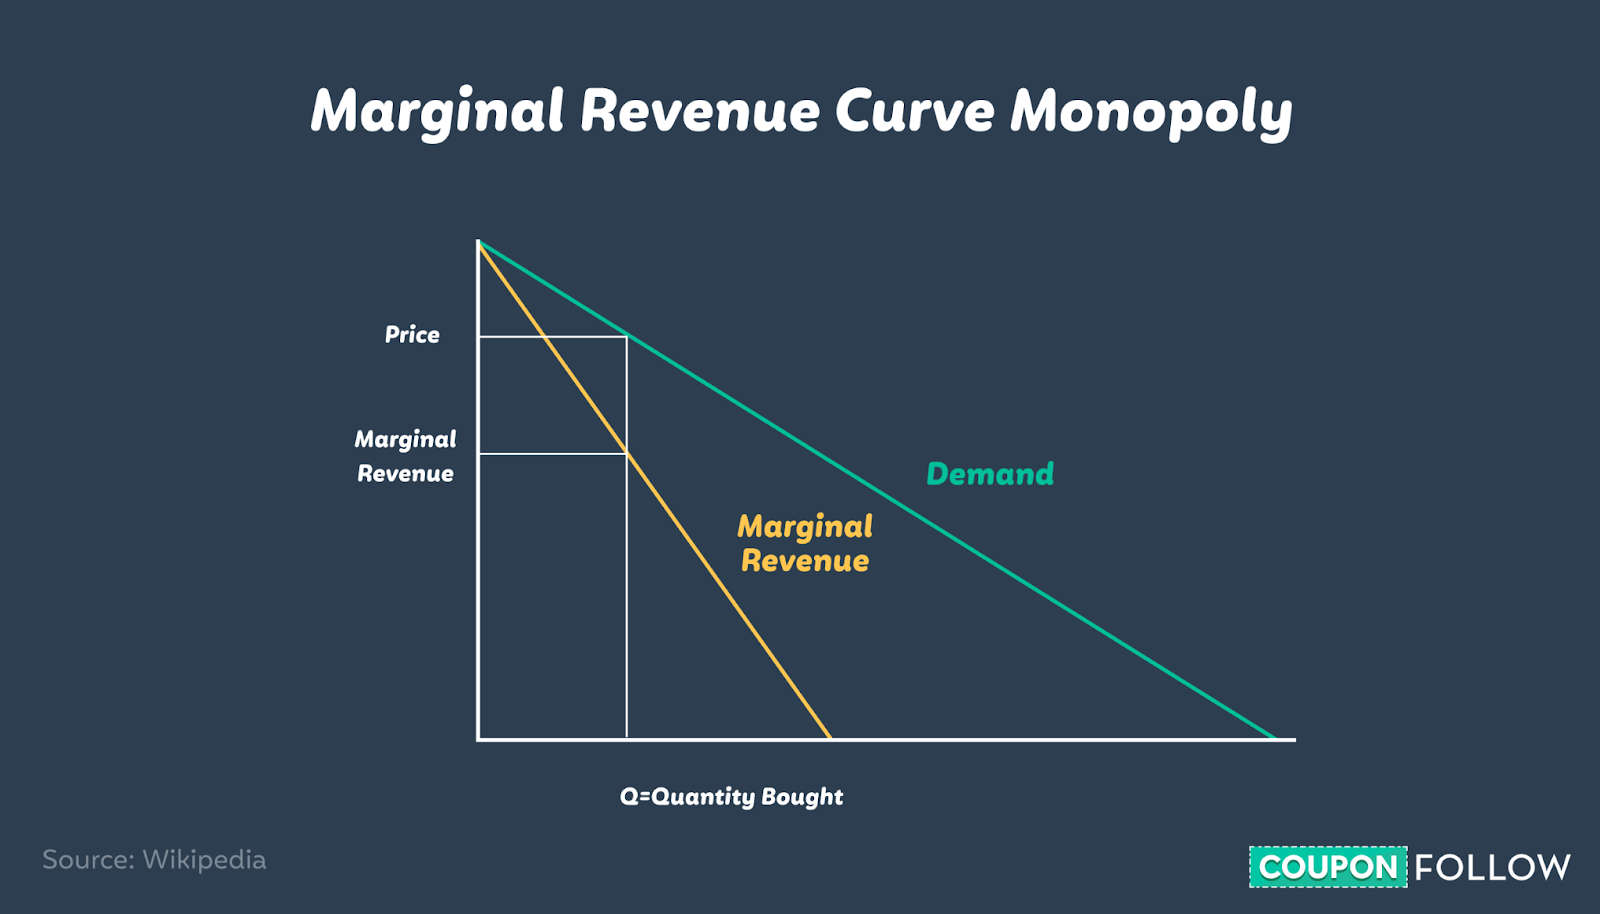 Graph outlining the marginal revenue curve under imperfect competition (a monopoly)